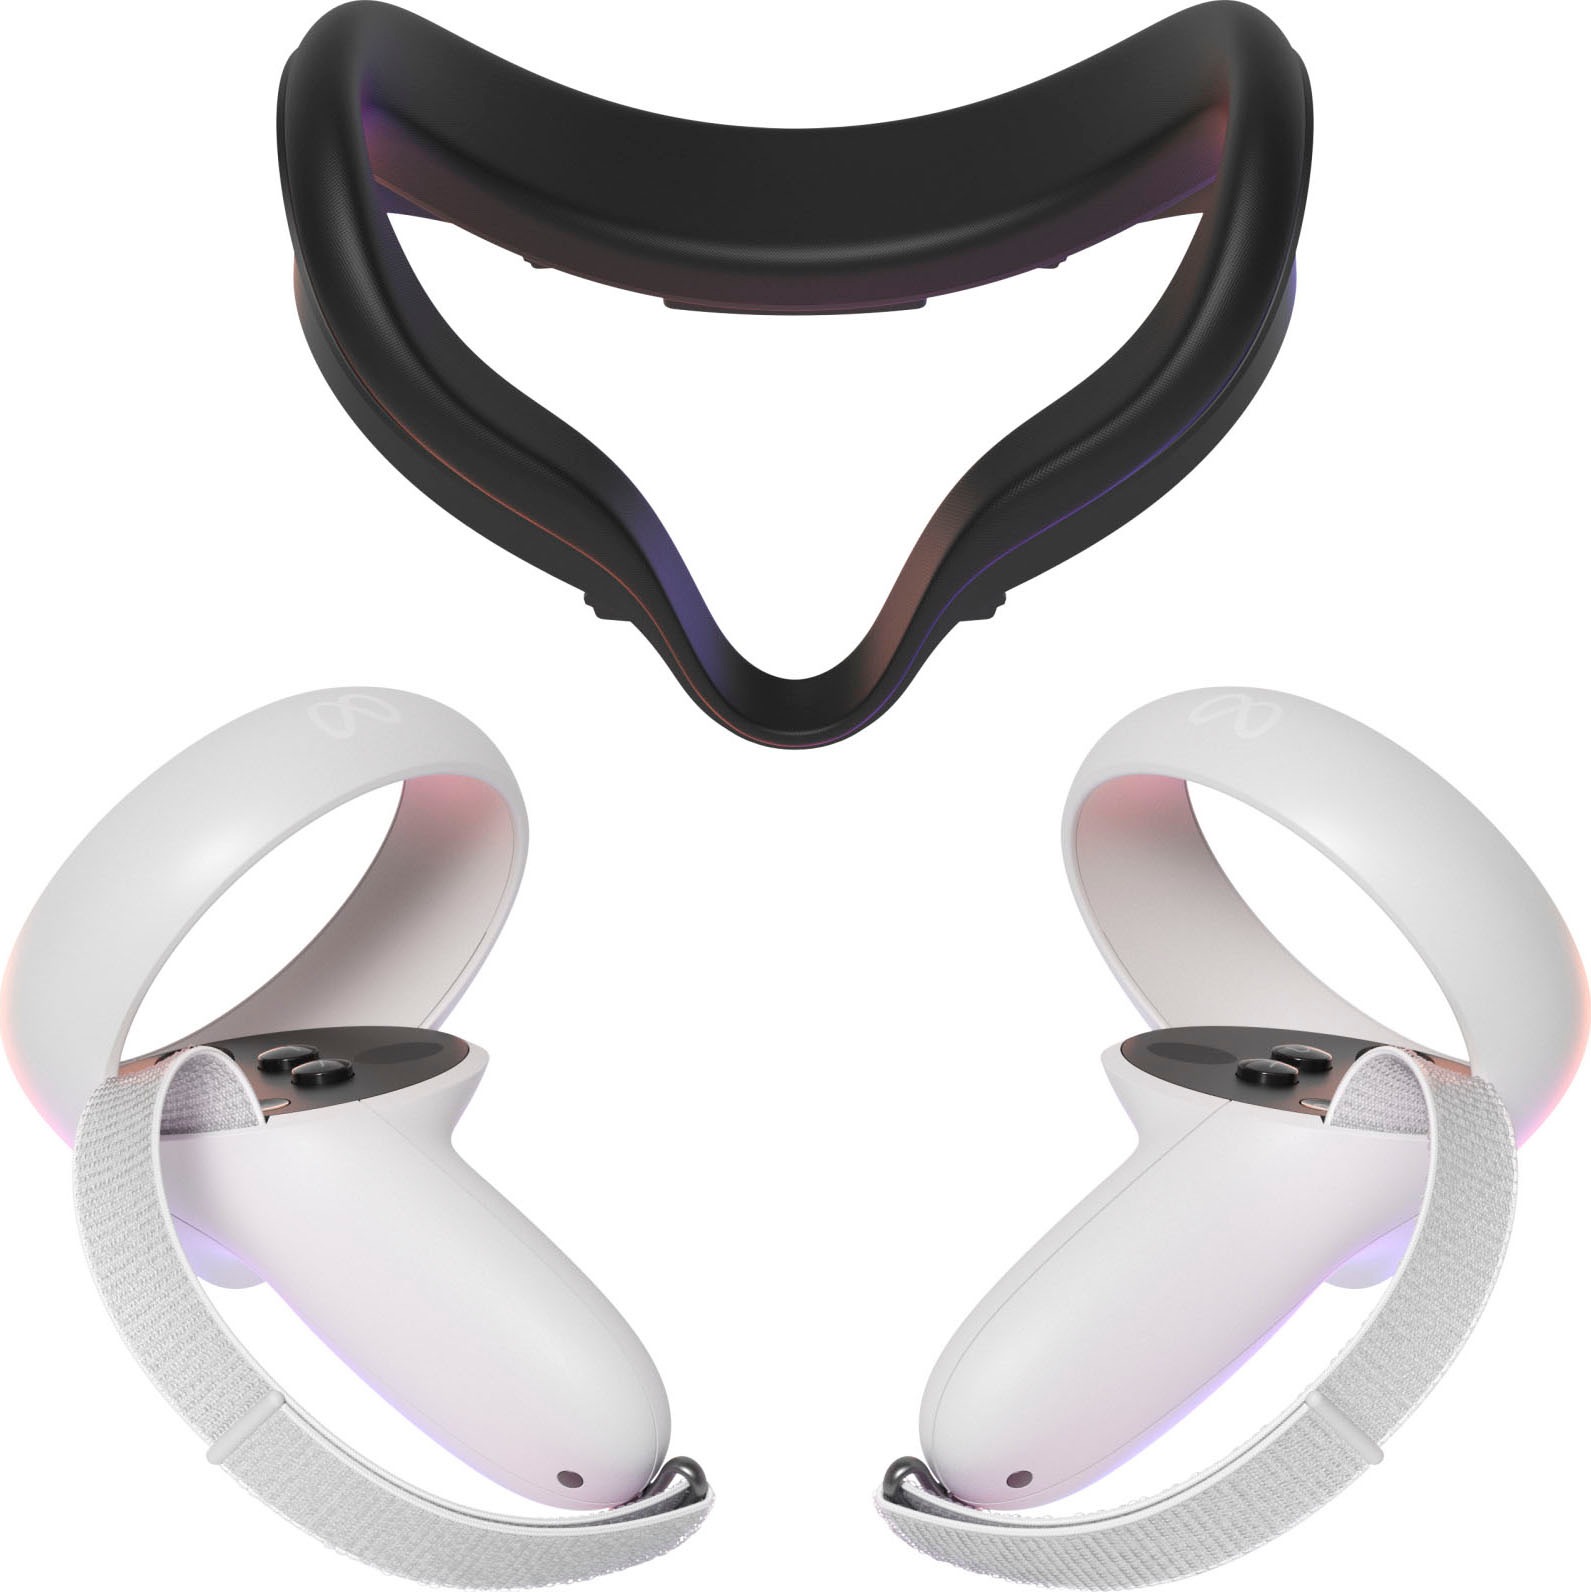 Virtual-Reality-Brille »Quest 2 Active Pack«